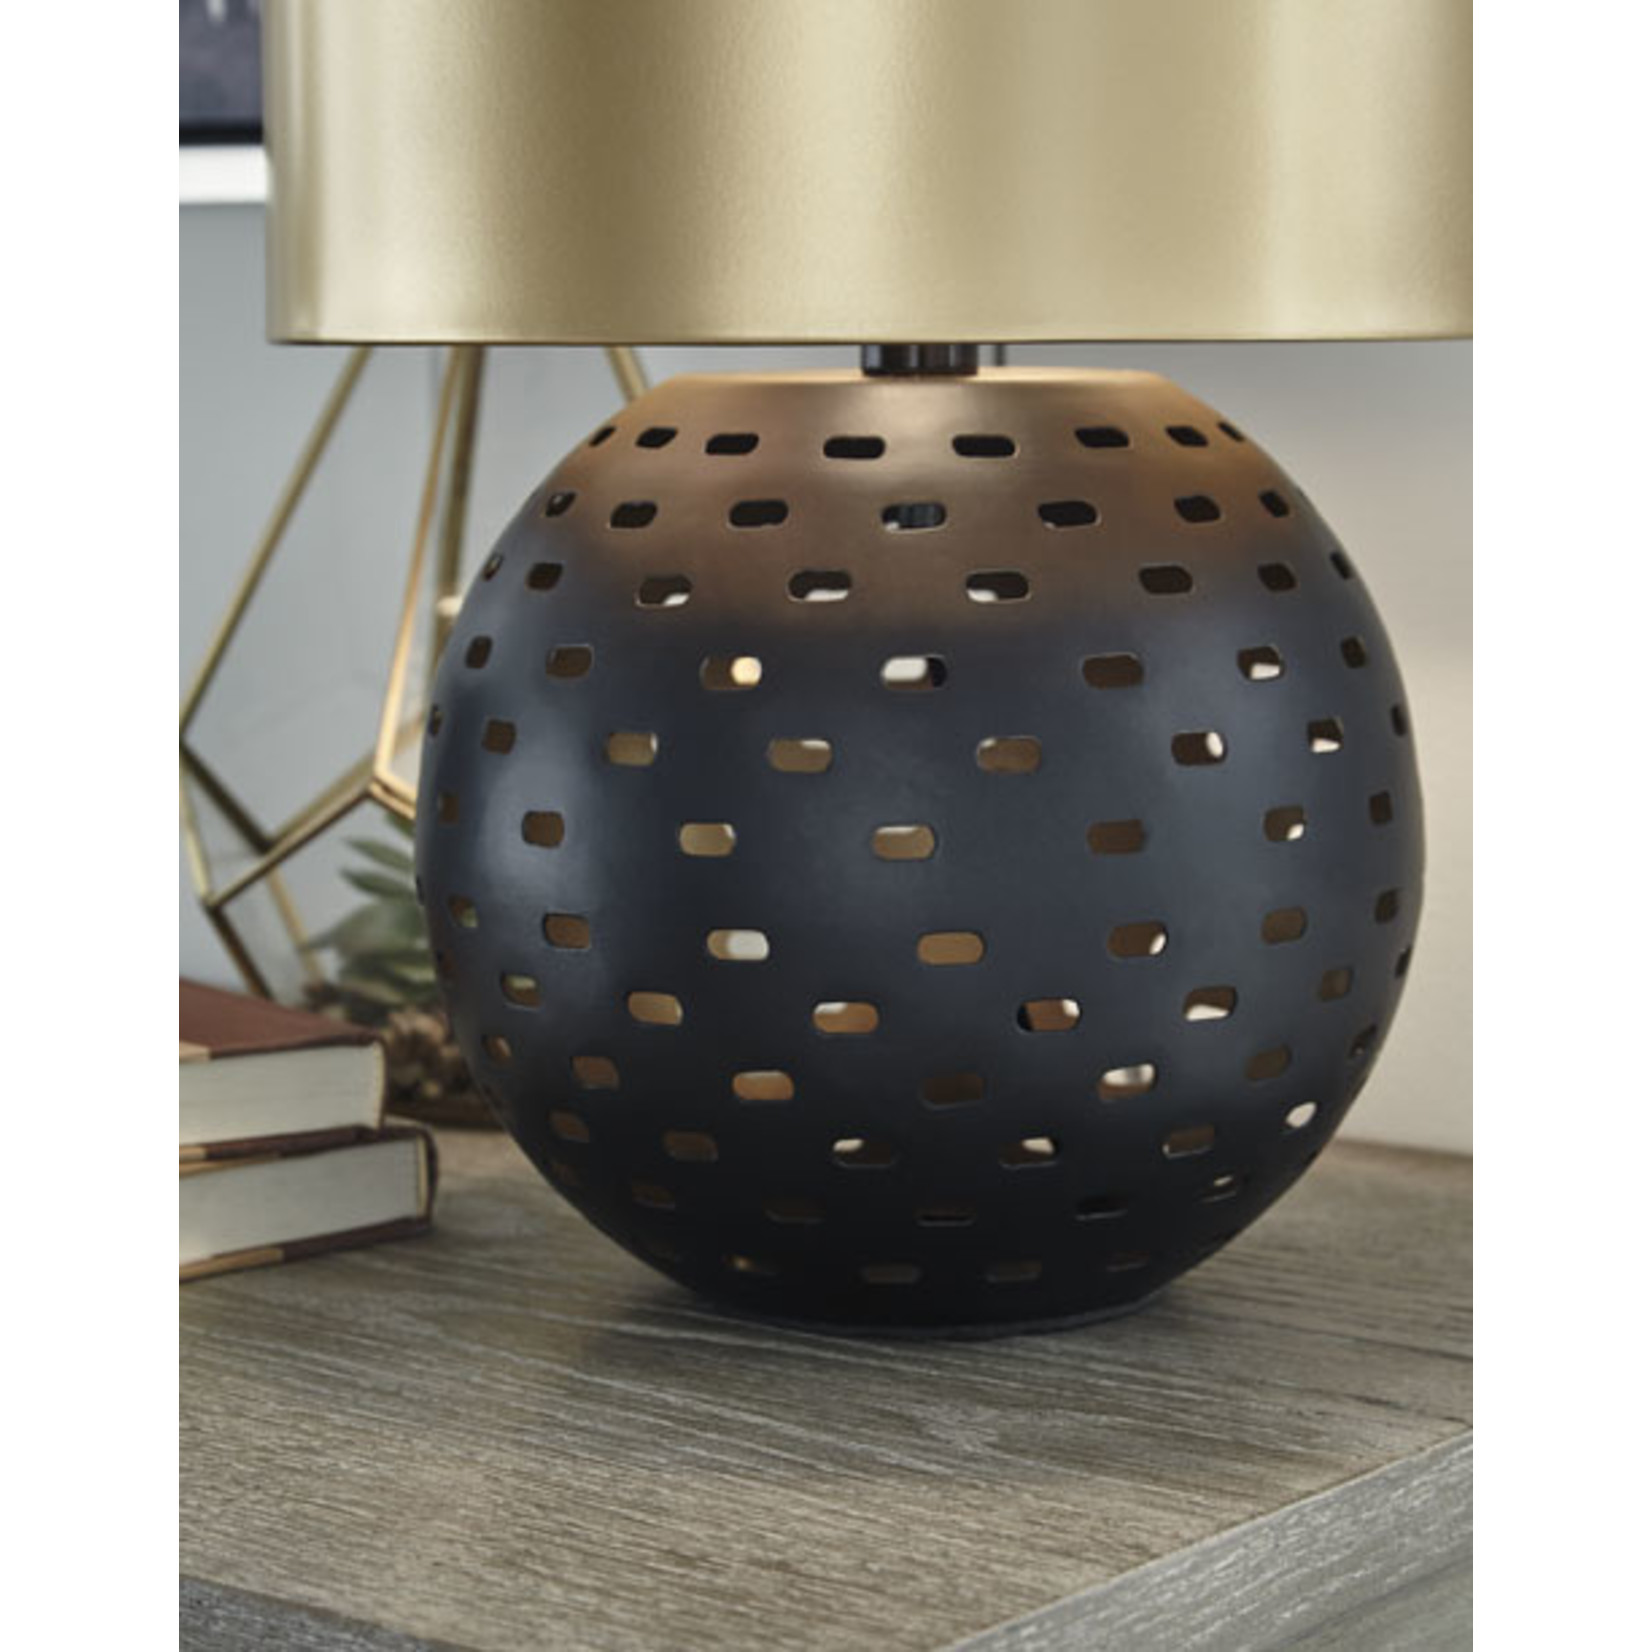 ASHLEY FURNITURE MAREIKE BLACK GOLD METAL TABLE LAMP BY ASHLEY